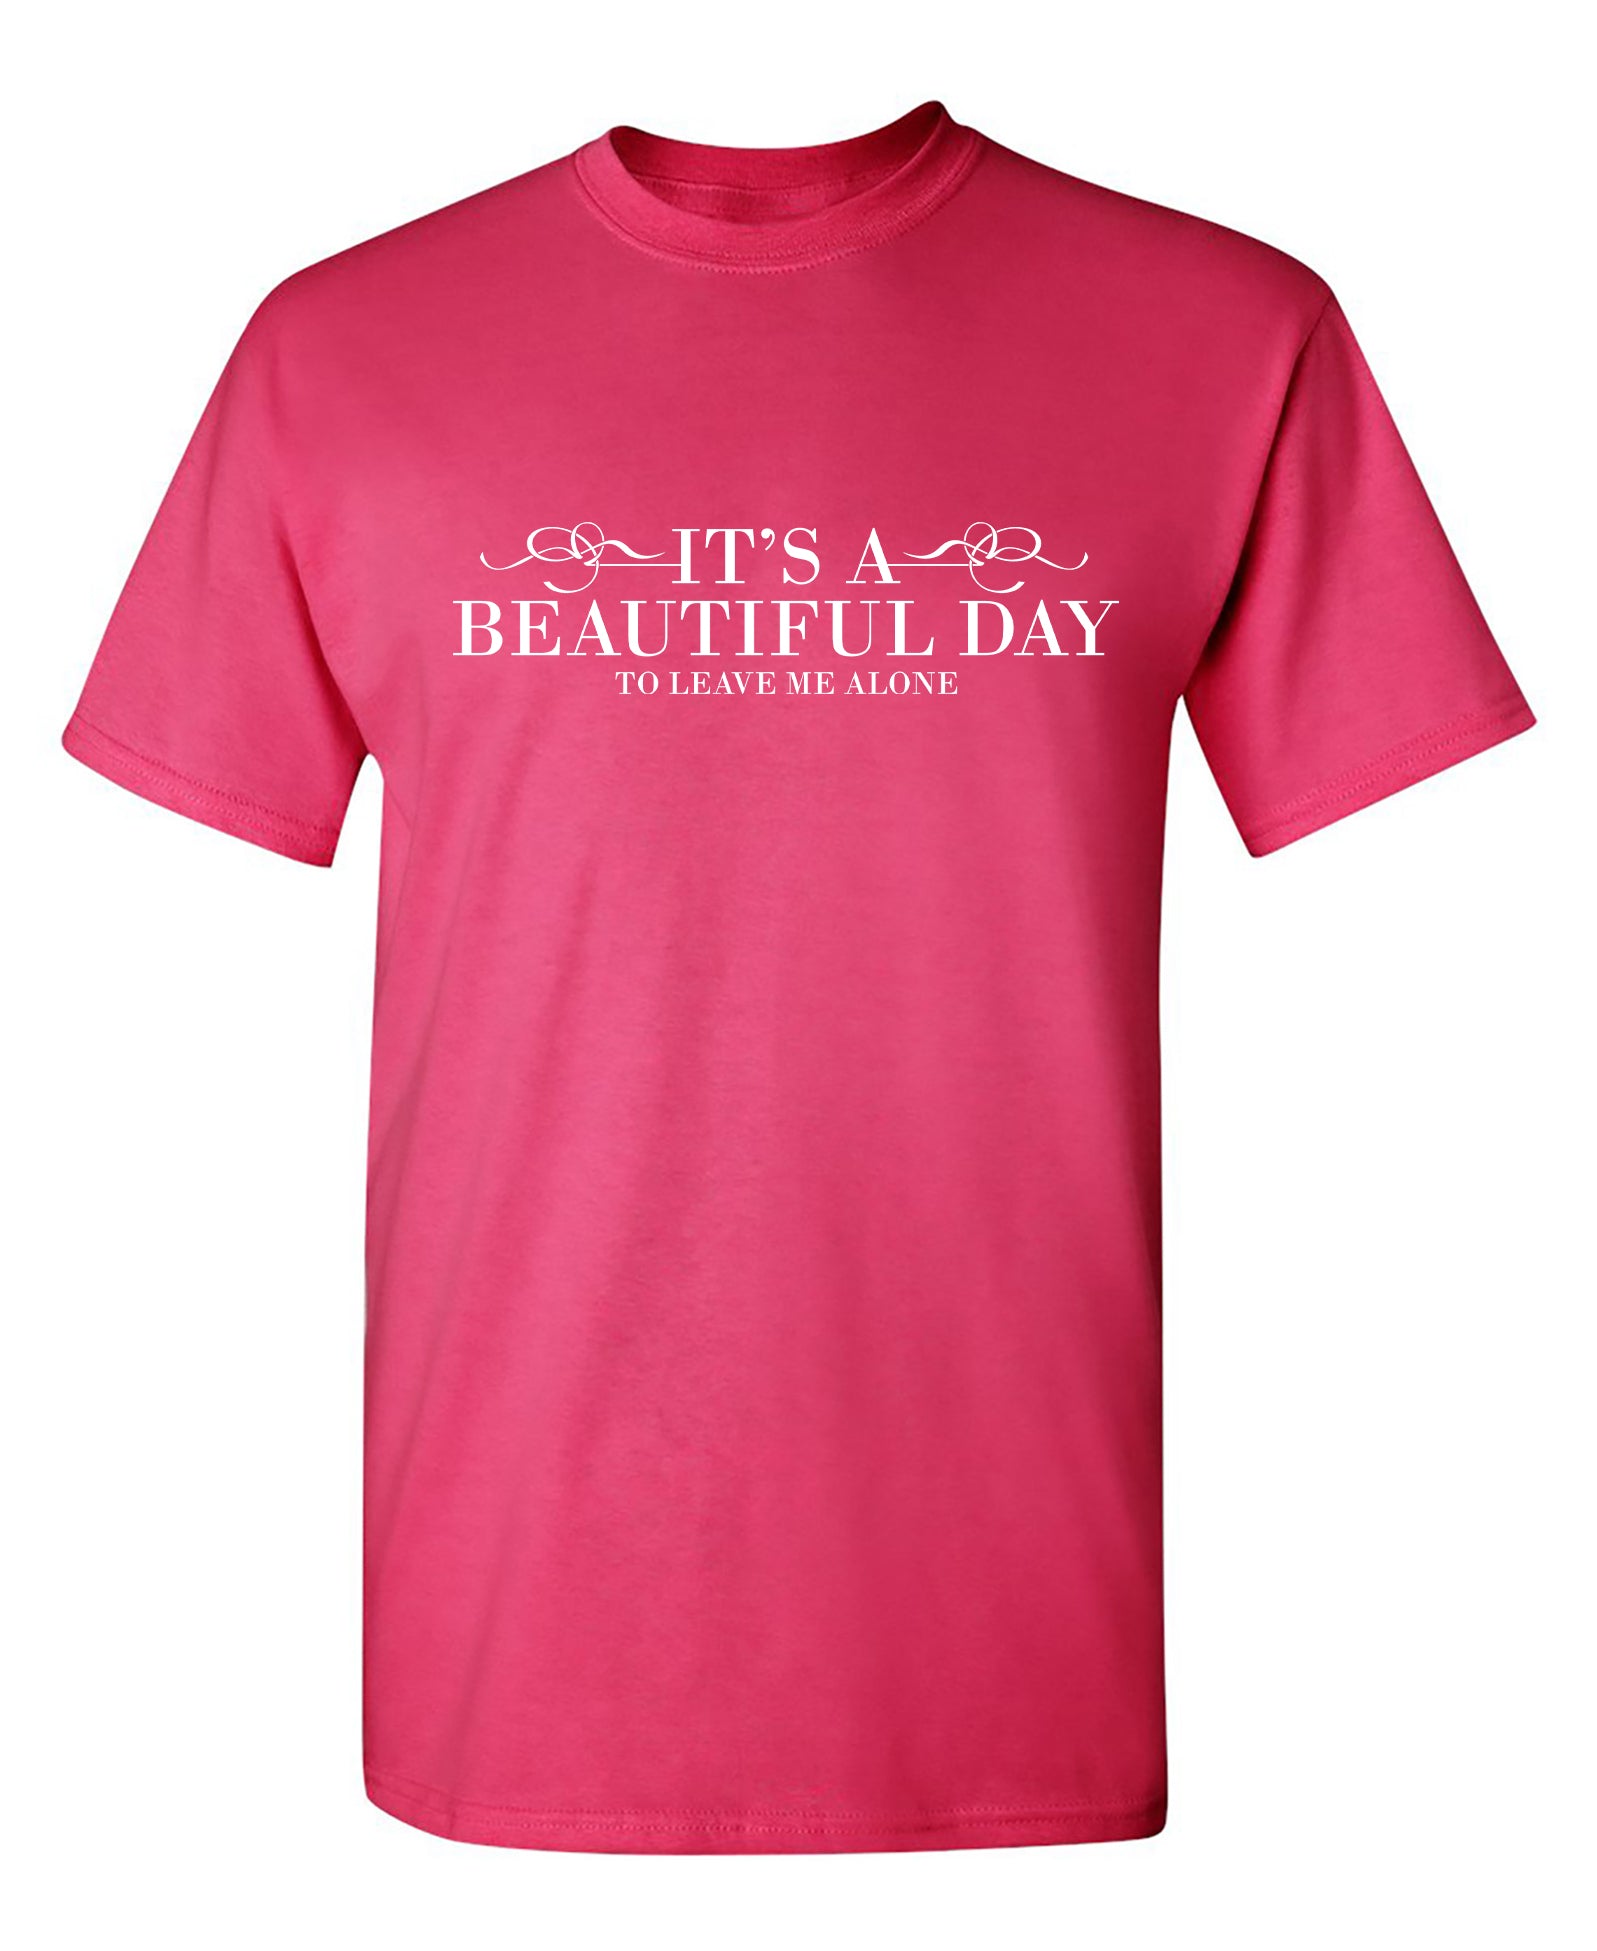 It's a Beautiful Day to Leave Me Alone - Funny T Shirts & Graphic Tees